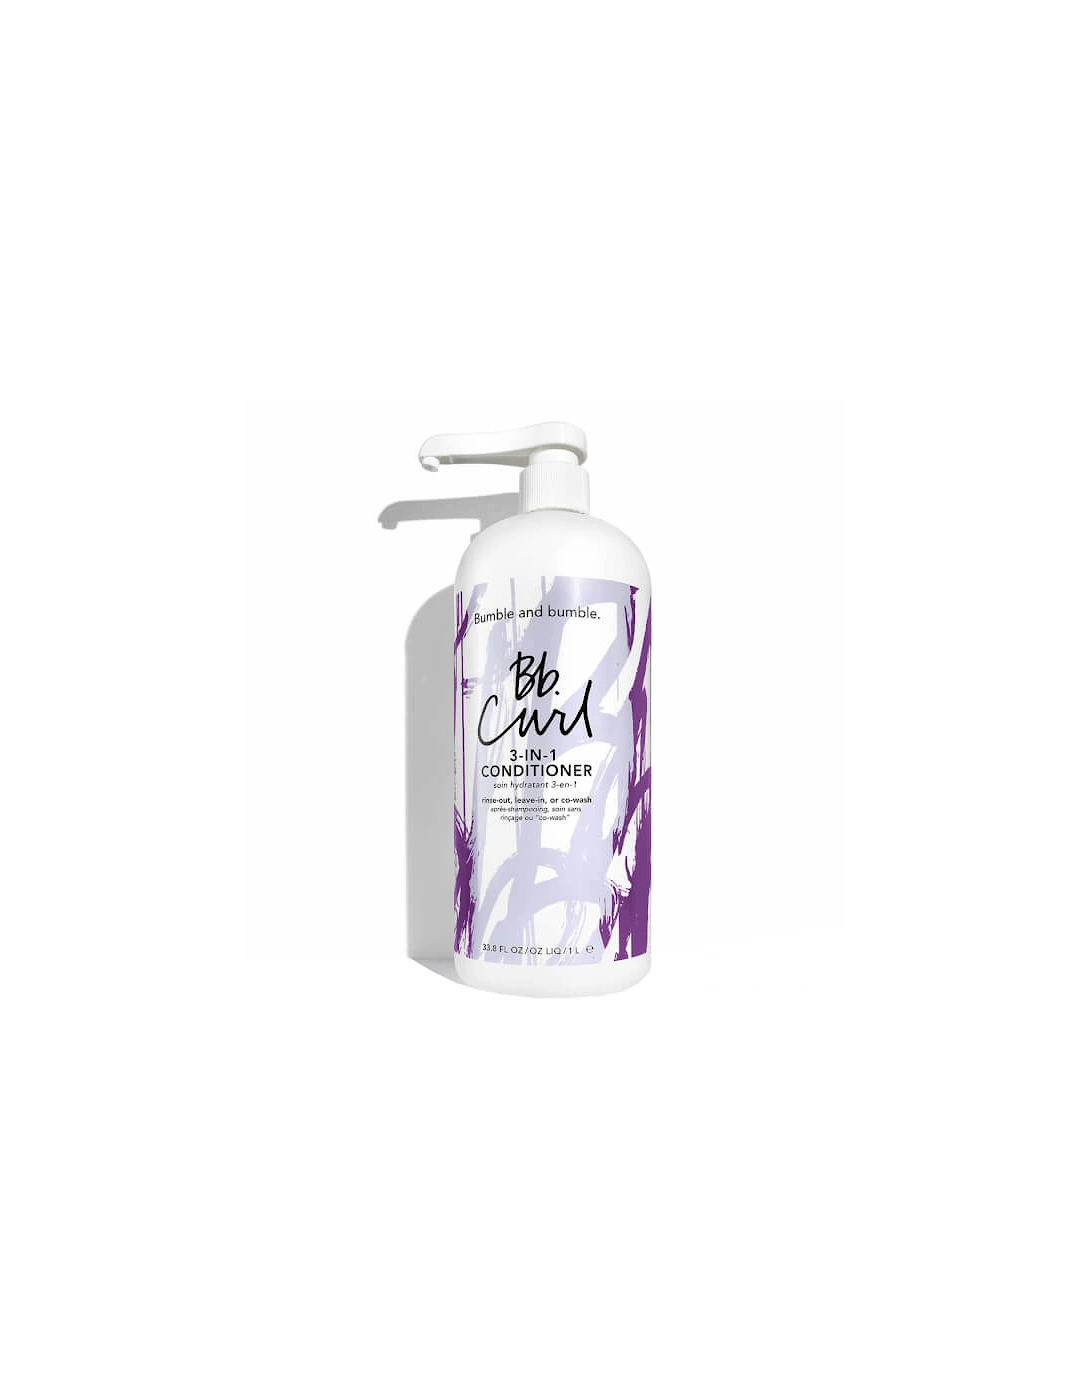 Bumble and bumble Curl 3-in-1 Conditioner 1L, 2 of 1